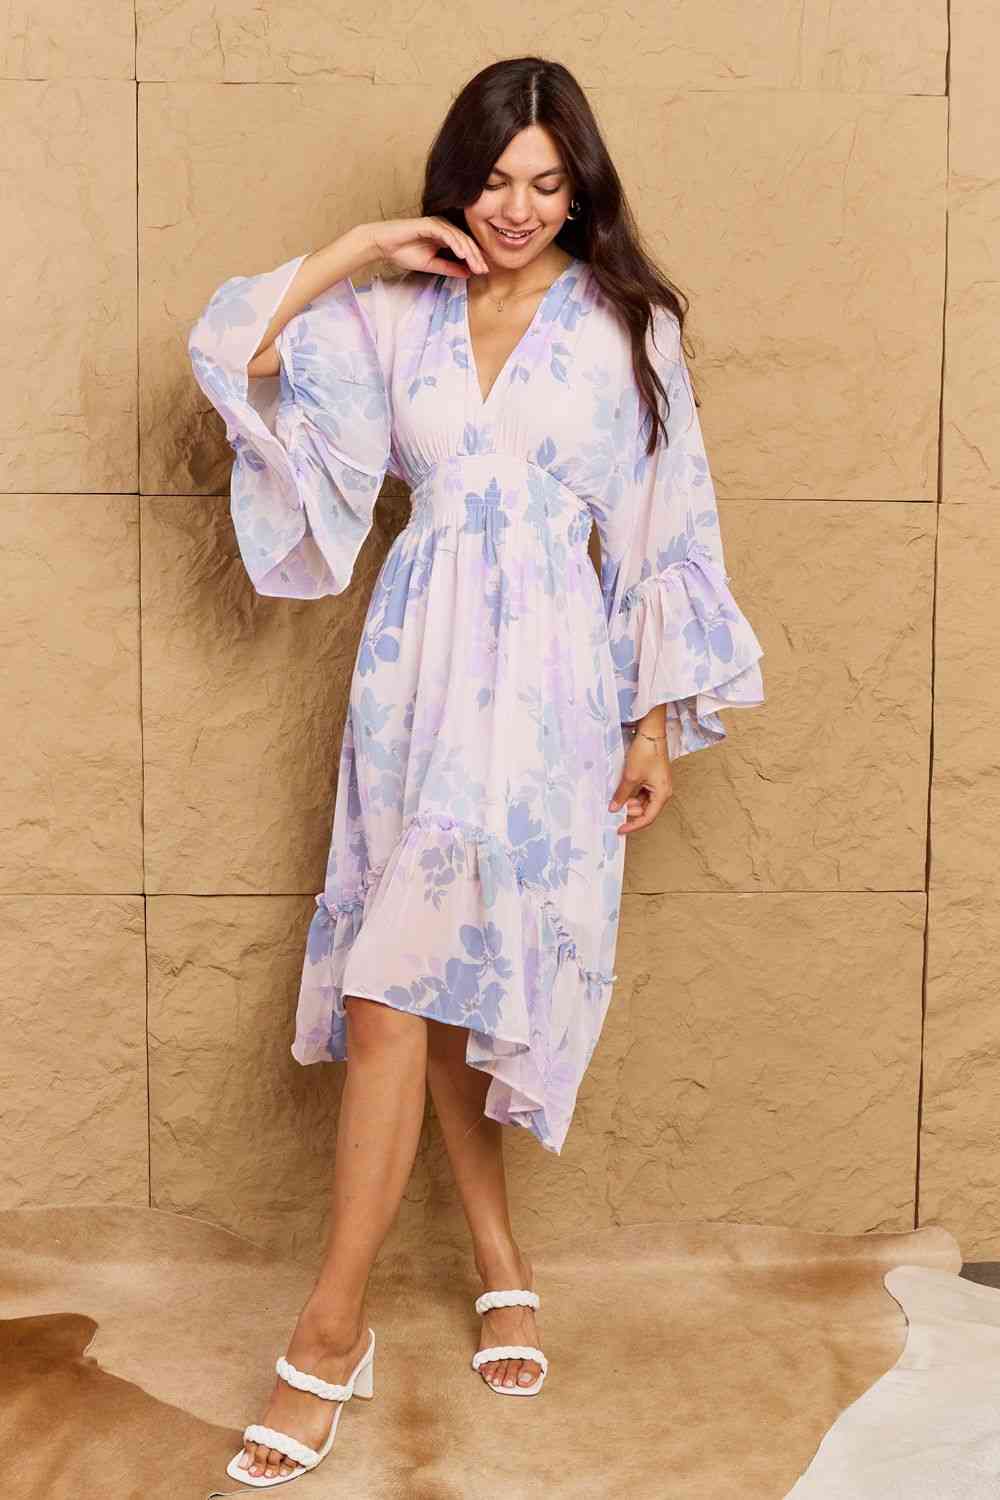 Take Me With You Floral Bell Sleeve Midi Dress in Blue - Floral / S - All Dresses - Dresses - 1 - 2024